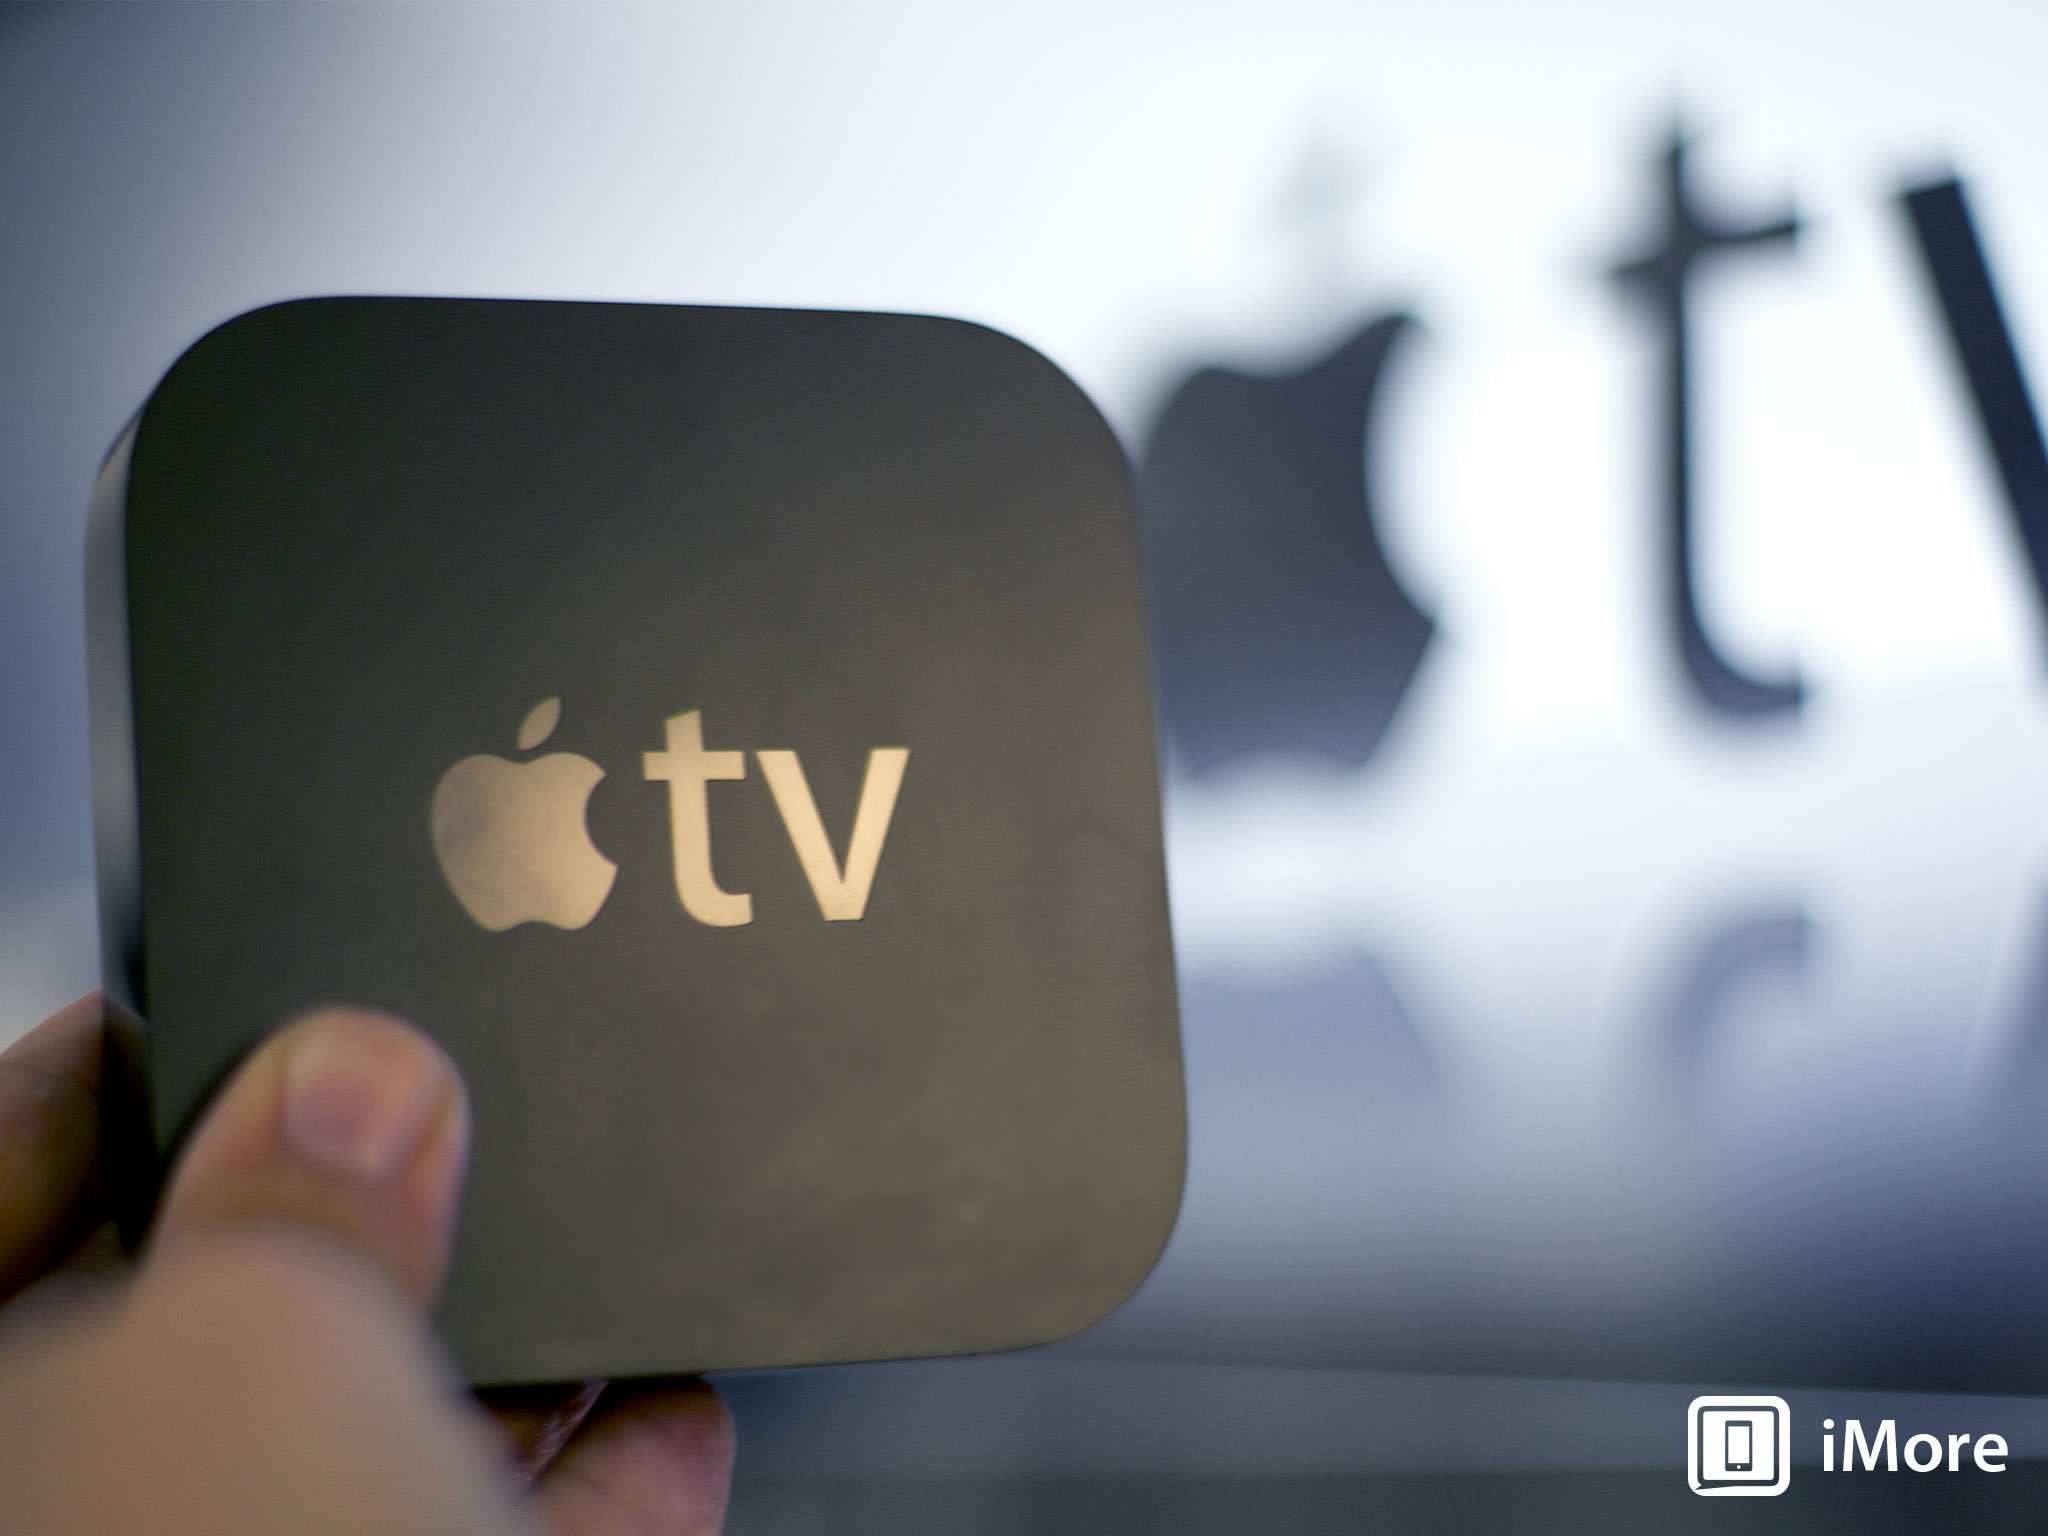 Apple TV adds more content, including The Disney Channel